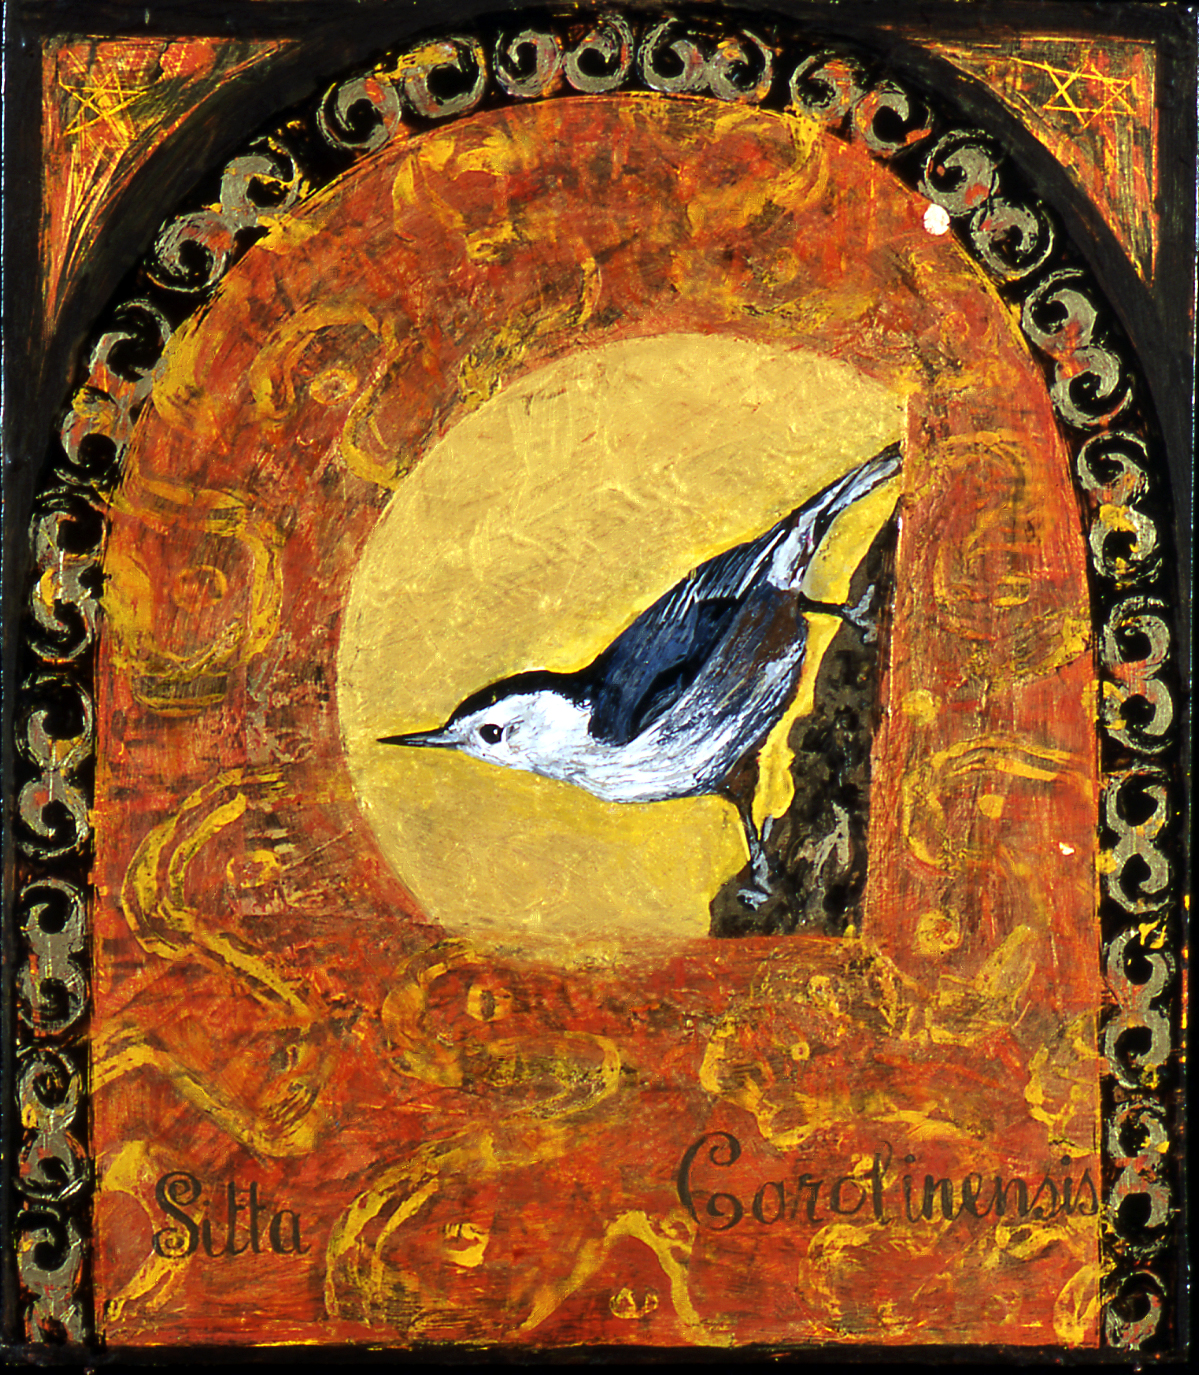 White Breasted Nuthatch, 2001, 14 ½ x 12 ¾, gouache and acrylic on wood, Sold